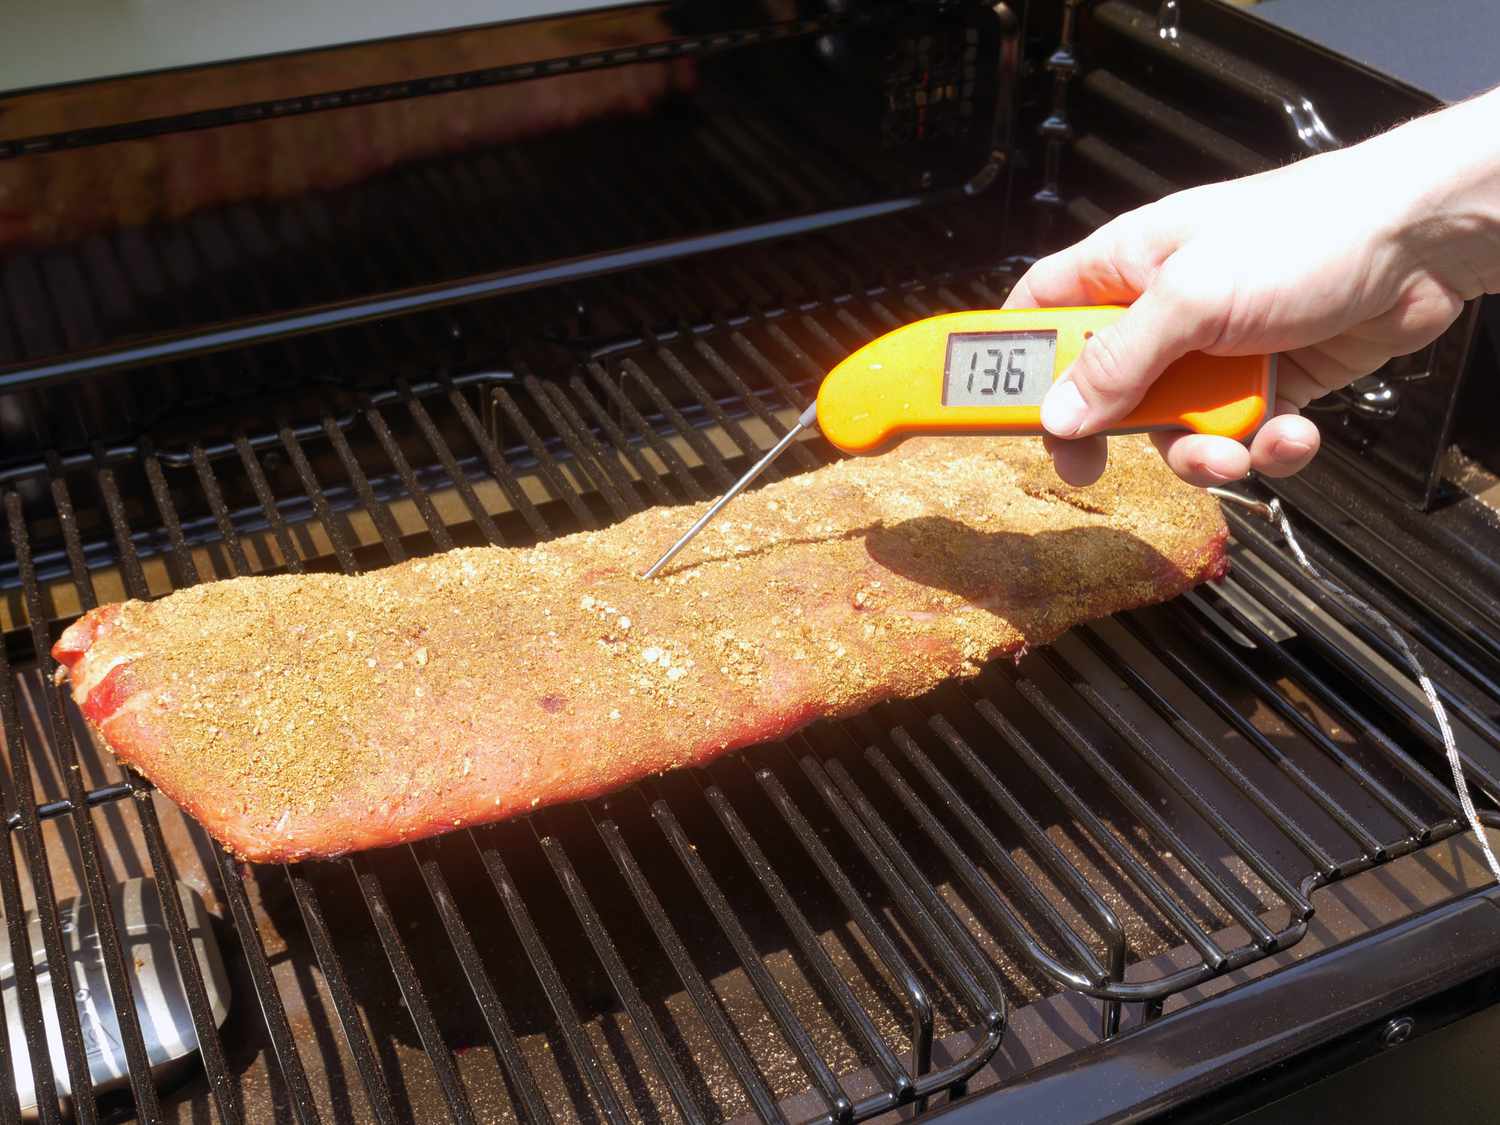 a hand using a thermapen to take the temperature of a rack of ribs on the grill grates.